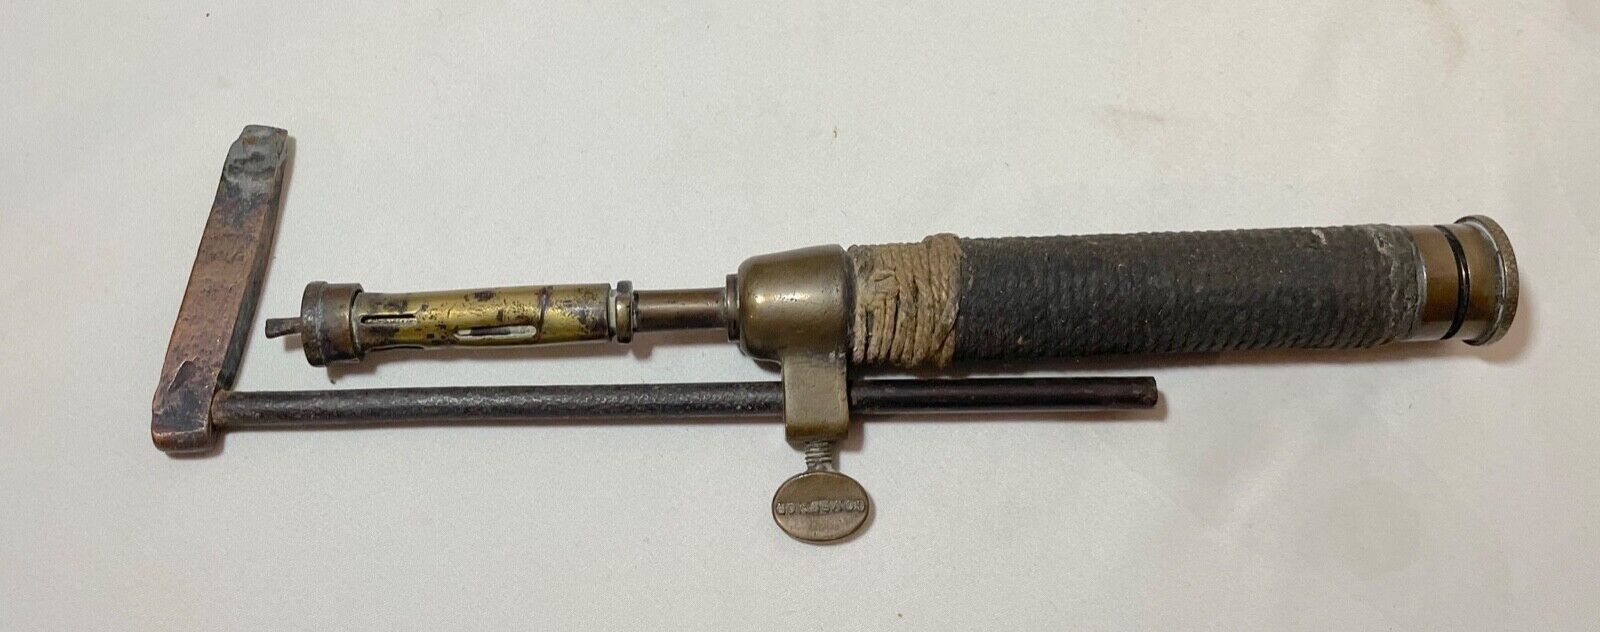 rare antique Governor J S & S brass copper soldering iron tool blow torch